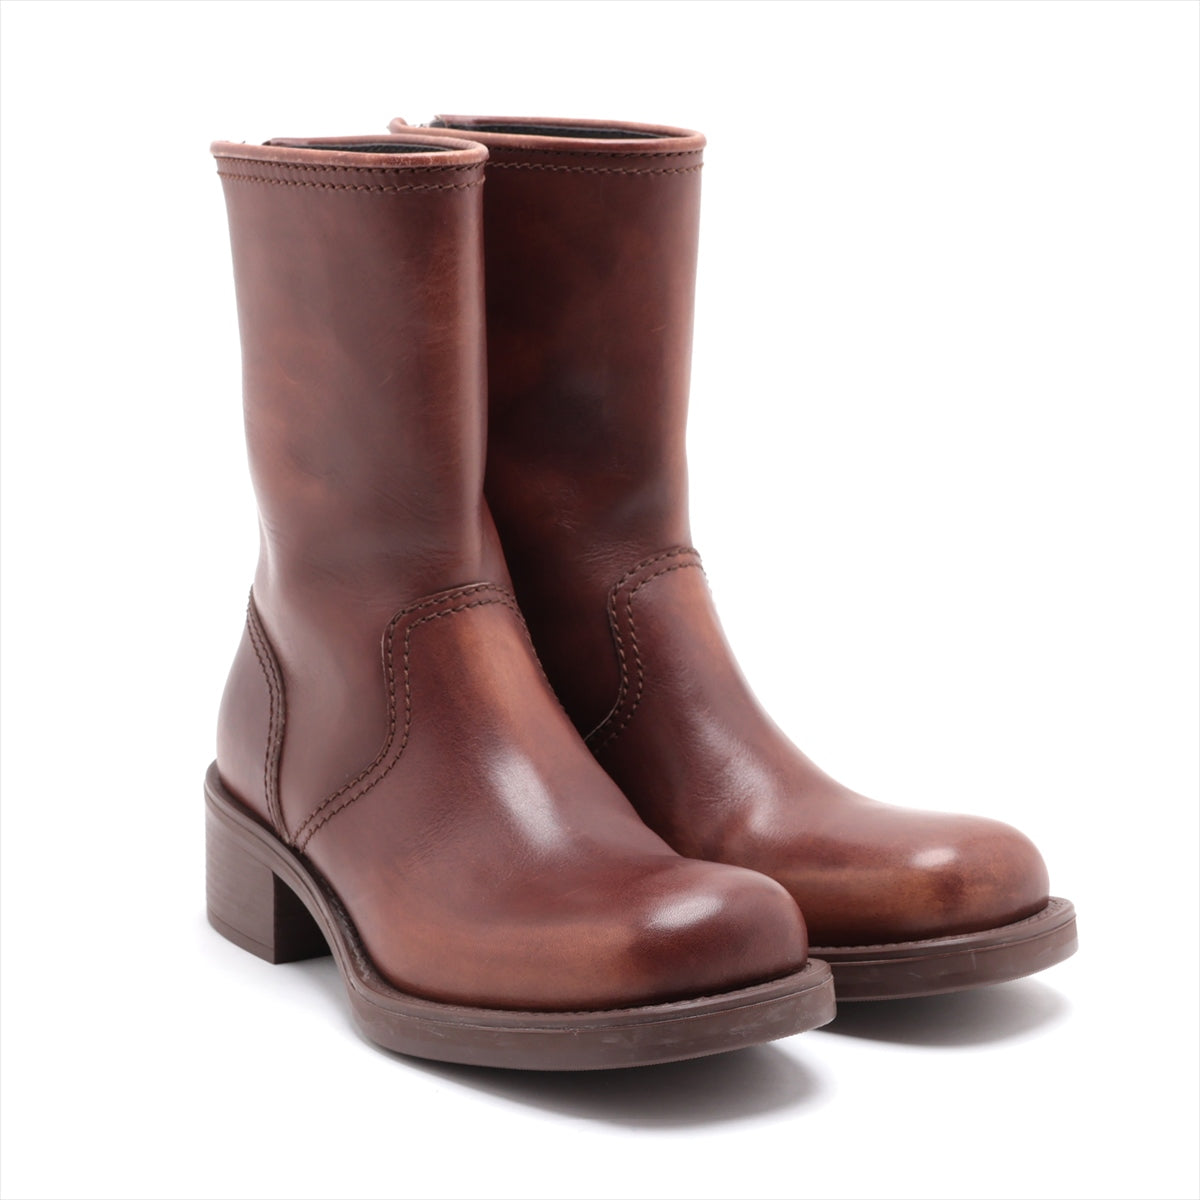 Miu Miu Leather Short Boots 36 Ladies' Brown Zip Vintage processing box There is a storage bag